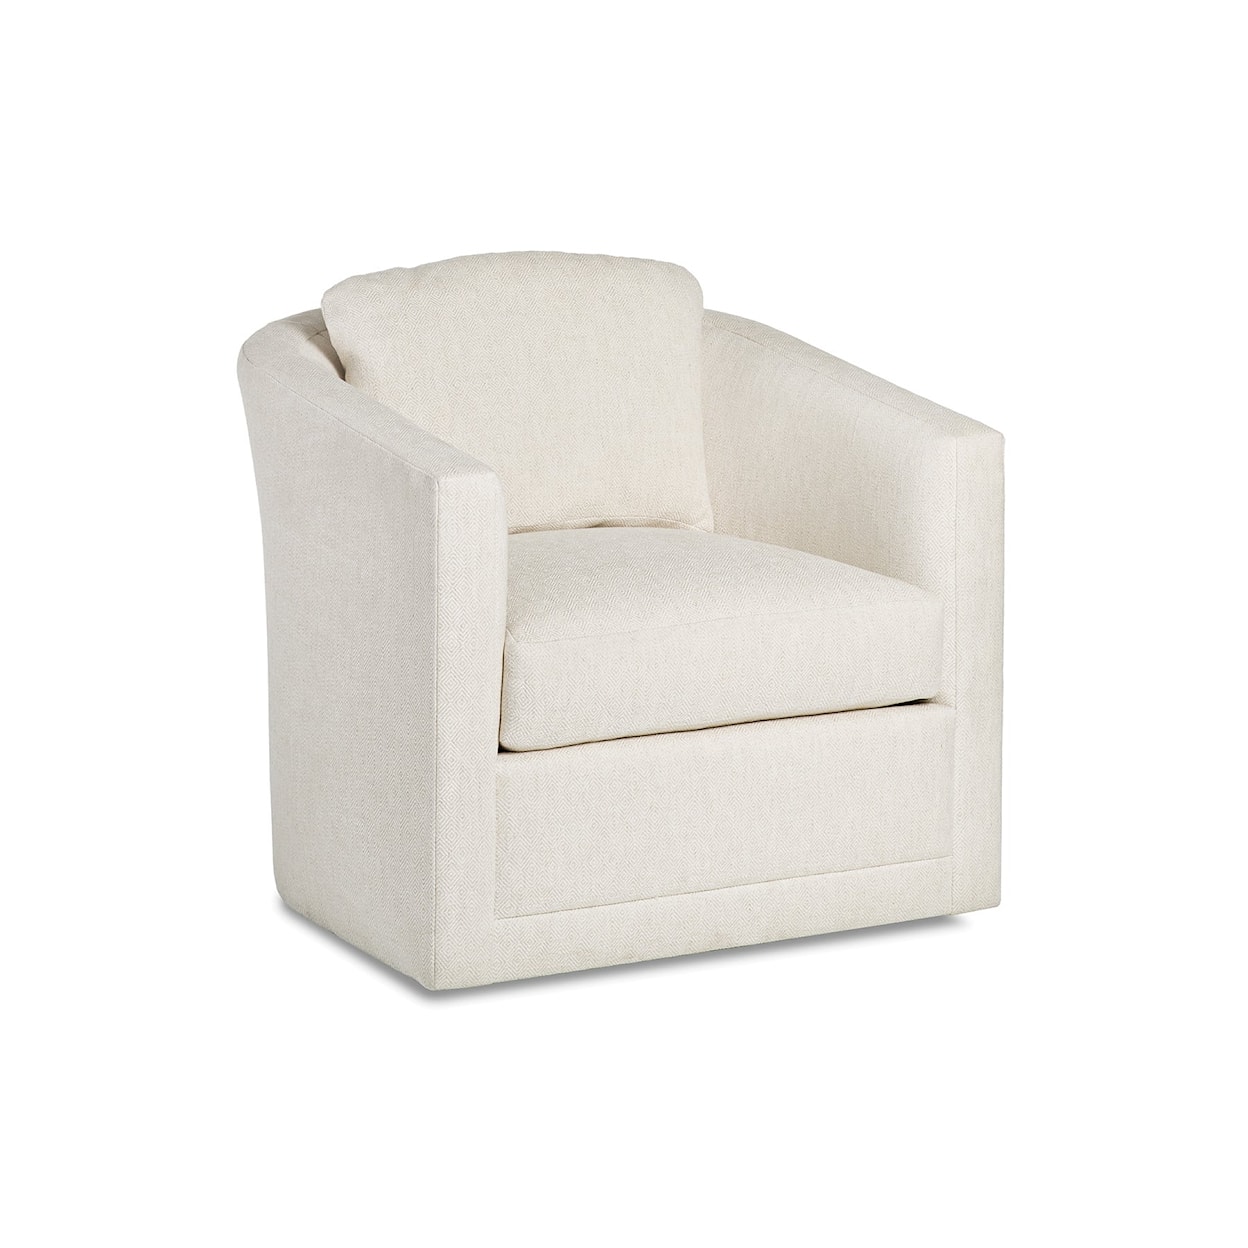 Jessica Charles Fine Upholstered Accents LARISSA SWIVEL CHAIR